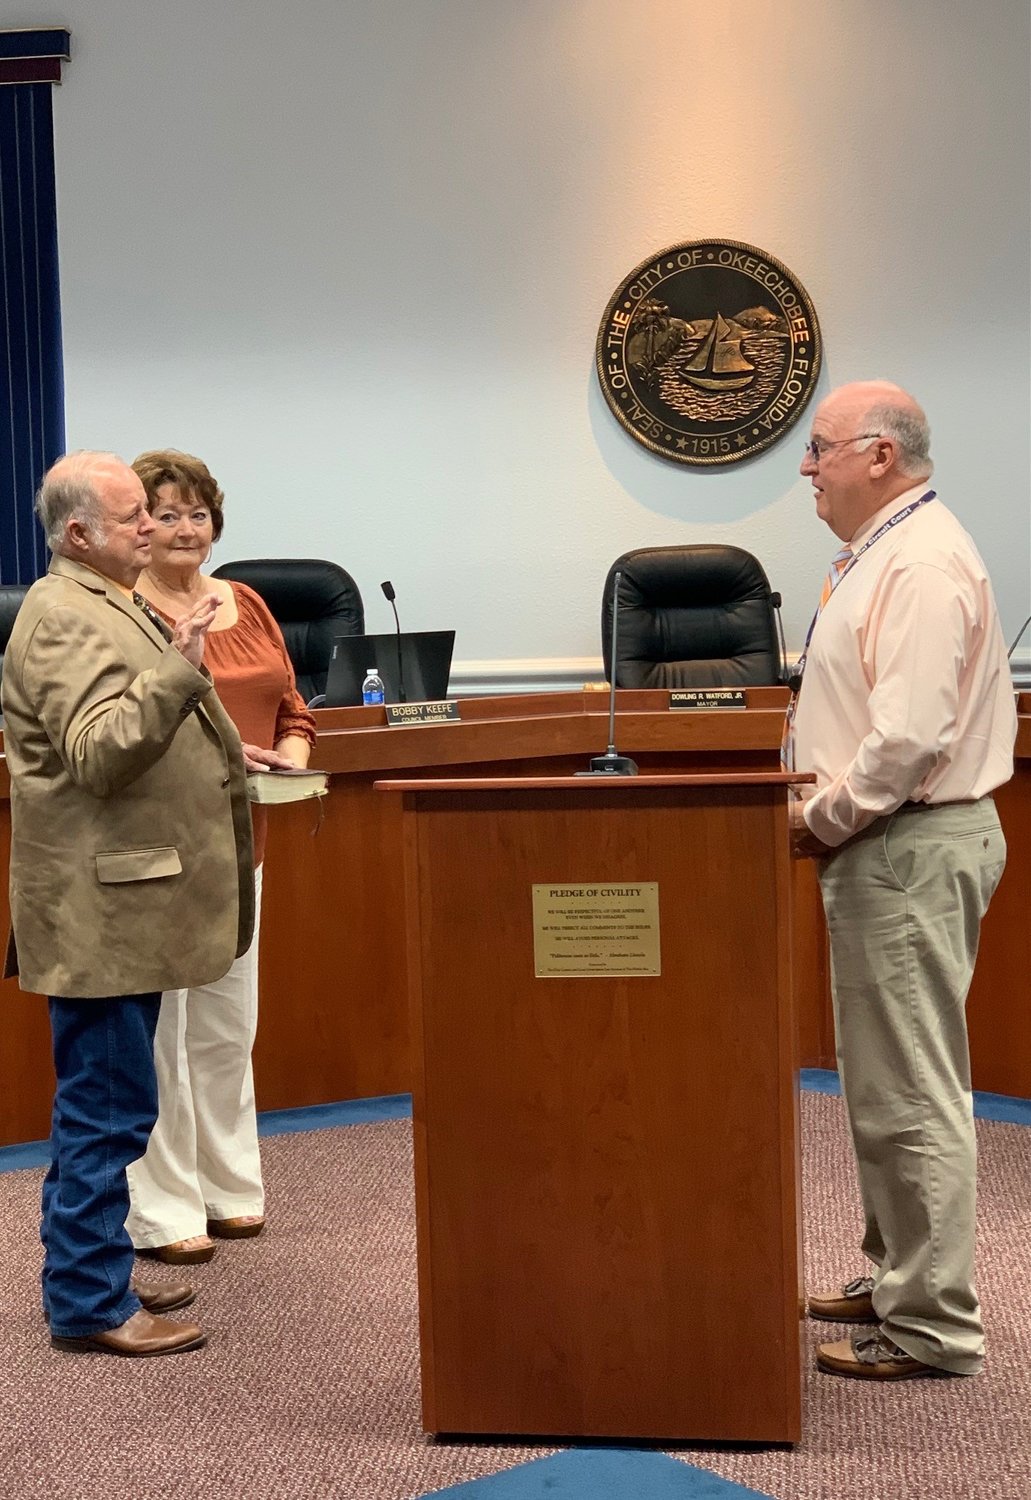 Judge Bill Wallace (right) administers the oath of office for Noel Chandler as he is sworn in for his term as city council member. Chandler's wife Louise holds the Bible used in the ceremony.